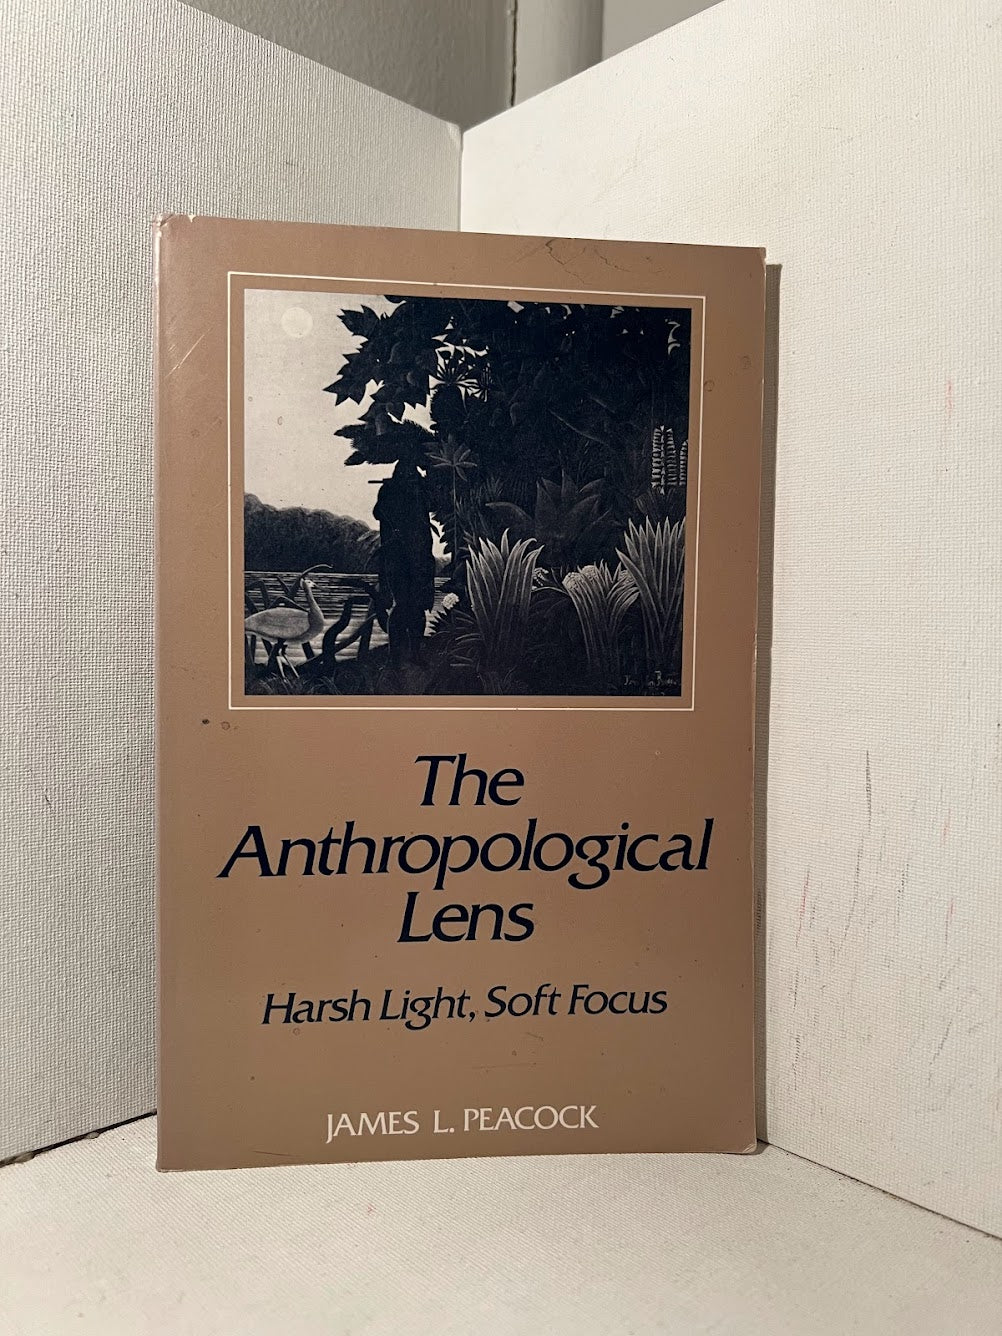 The Anthropological Lens by James L. Peacock